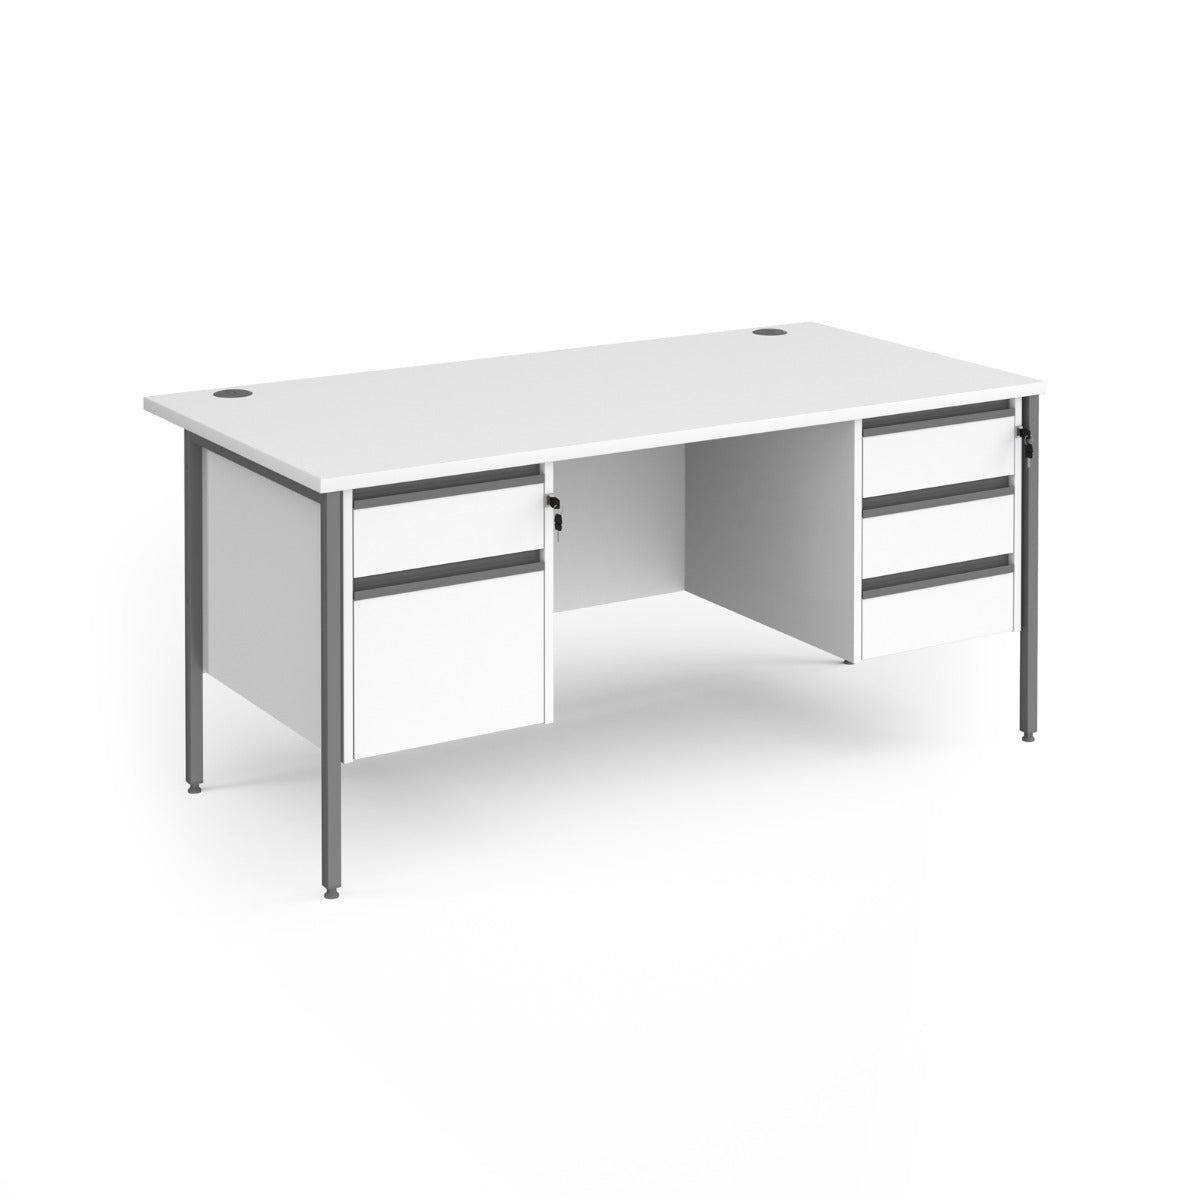 Contract H Frame Straight Office Desk with Two & Three Drawer Storage